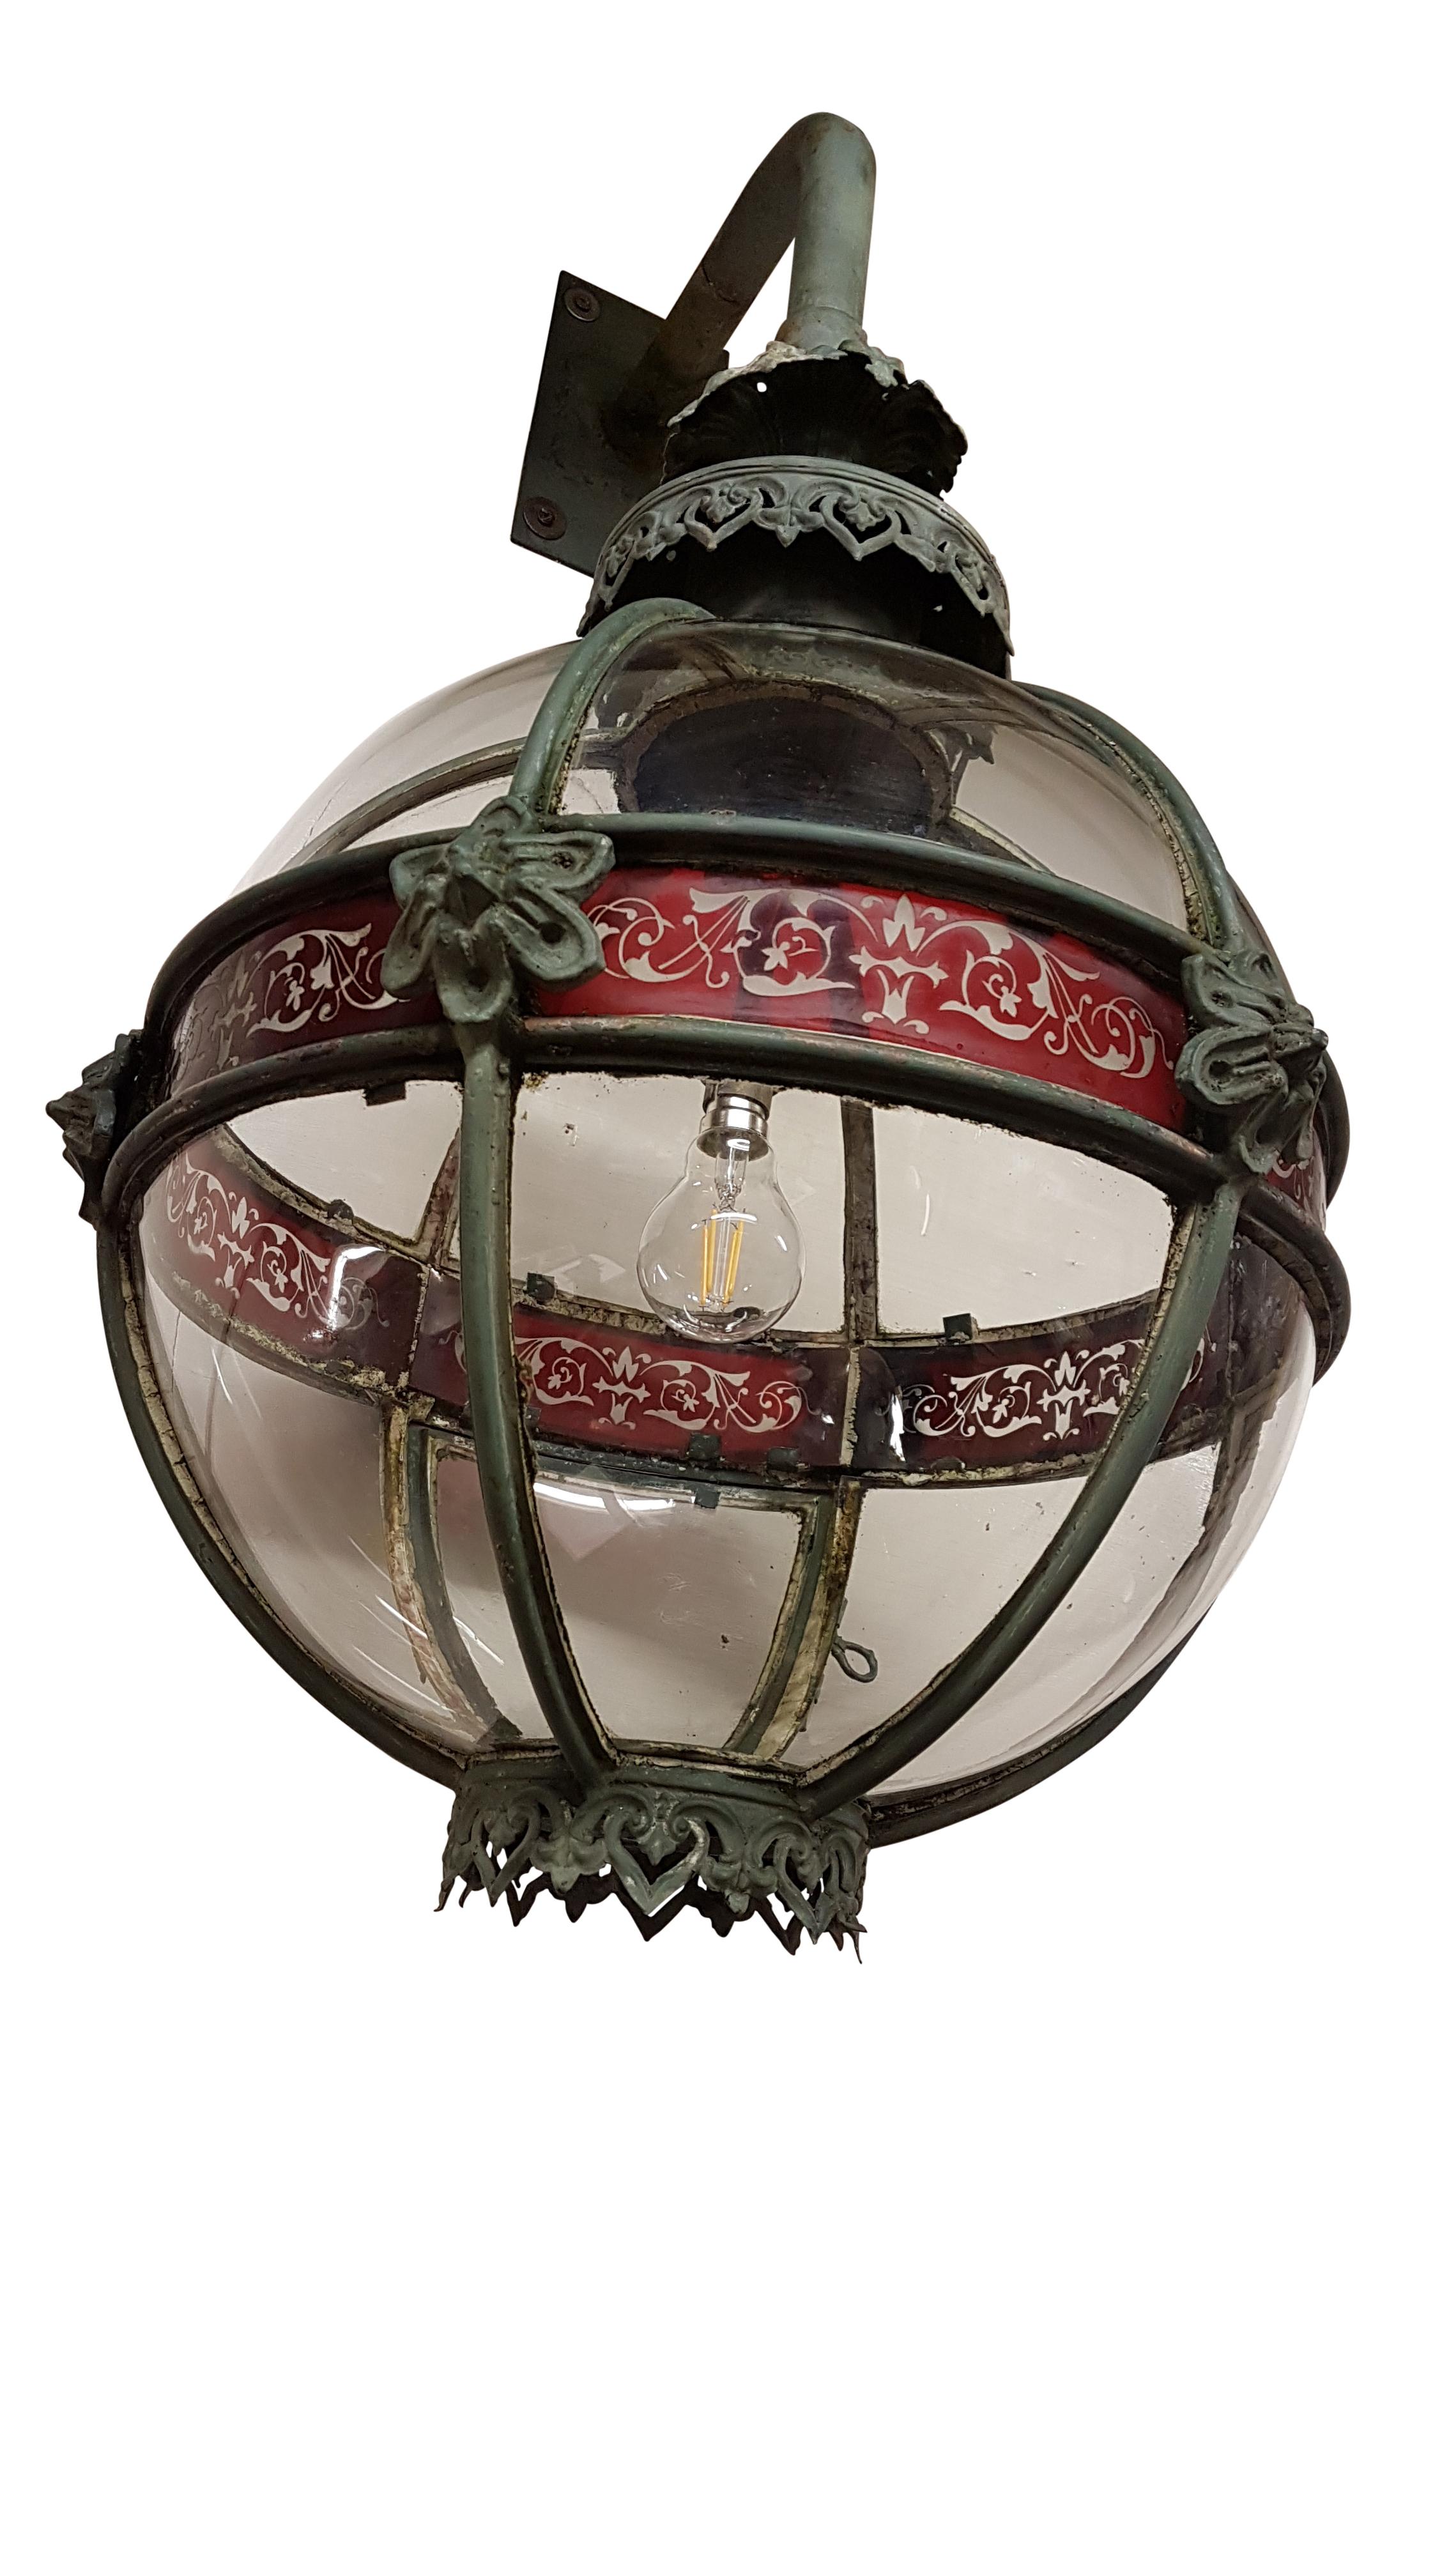 This was originally a gas lantern that reputedly was in the Palace of Westminster until new electrified ones were fitted in the early 1930s. Rather than convert these they were sold off and new ones fitted in their place. This one was purchased